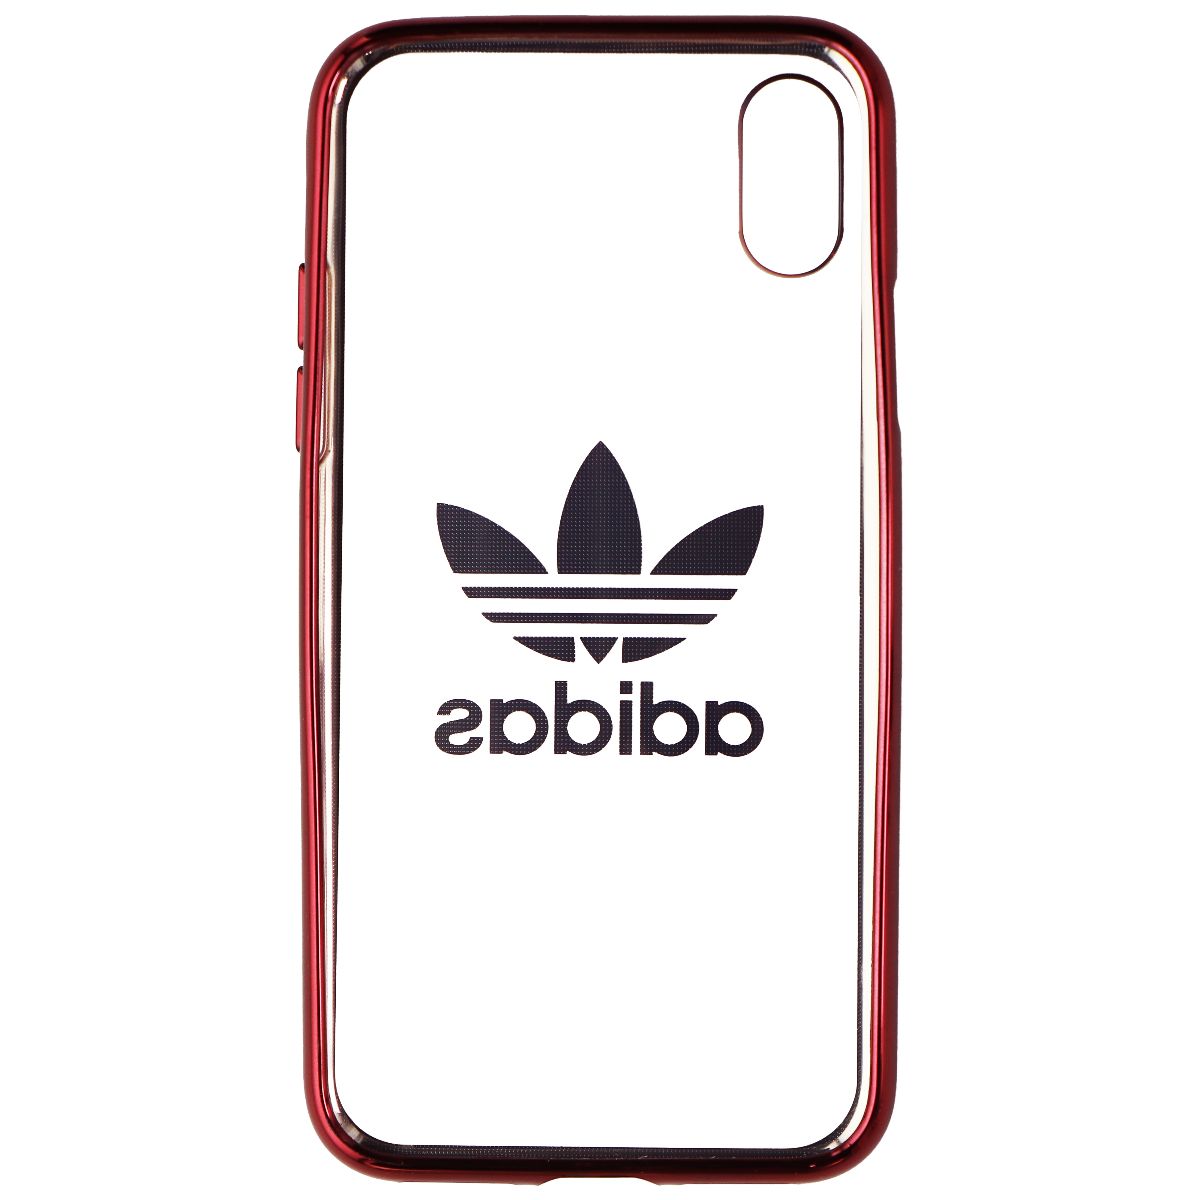 Adidas Flexible Clear Case for Apple iPhone Xs and X - Clear/Red/Adidas Logo Cell Phone - Cases, Covers & Skins Adidas    - Simple Cell Bulk Wholesale Pricing - USA Seller